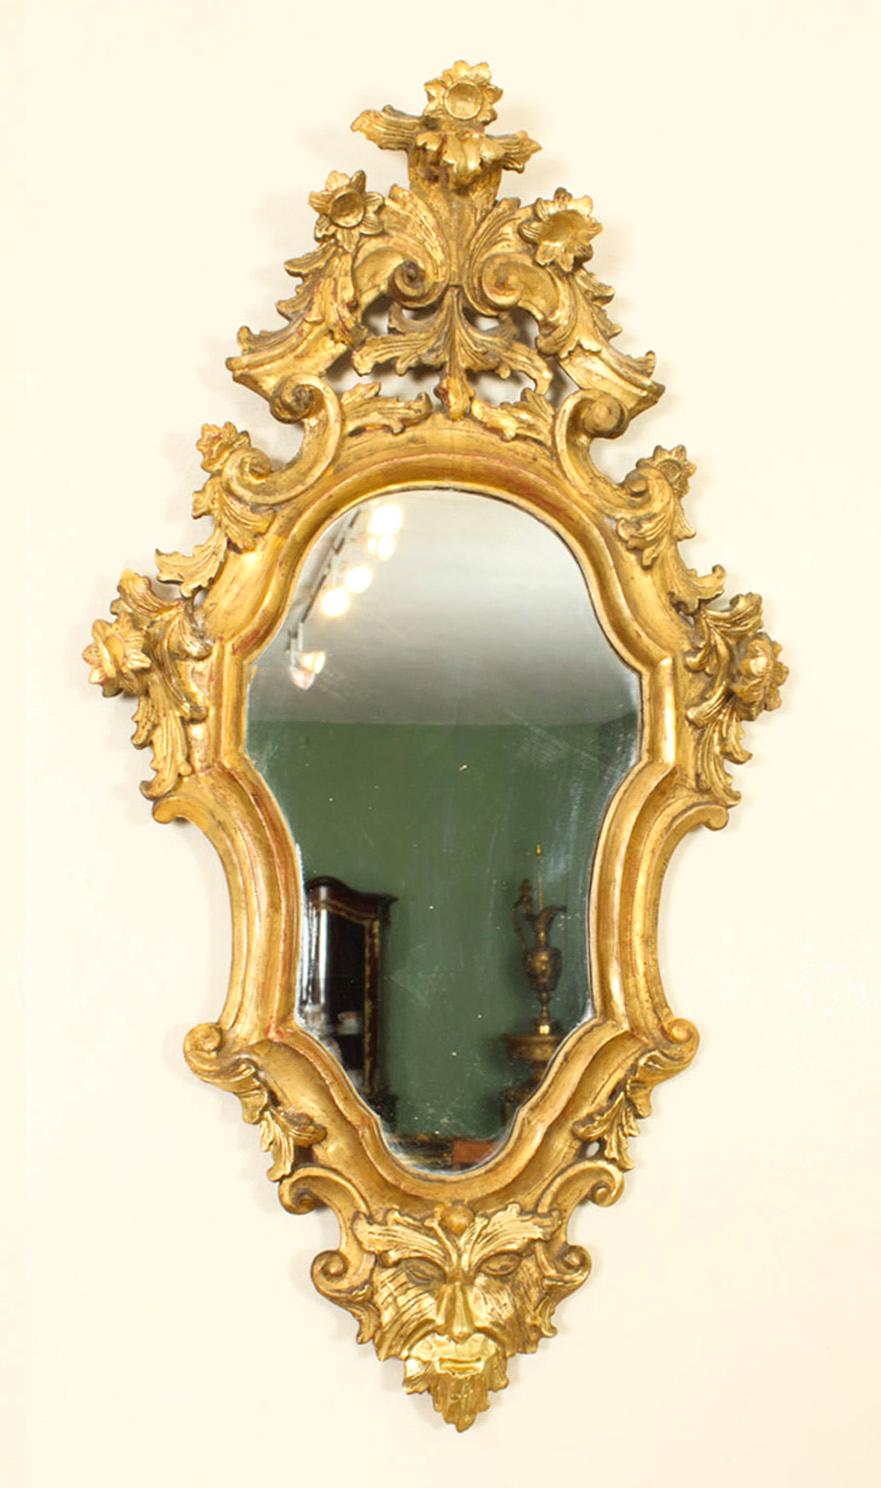 This is a superb pair of antique Italian Florentine  giltwood mirrors, circa 1870 in date.

The shaped mirrors plates are set within a Rococo boldly-carved S scroll and mask frame, and they retain the original gilding.

Florentine style refers to